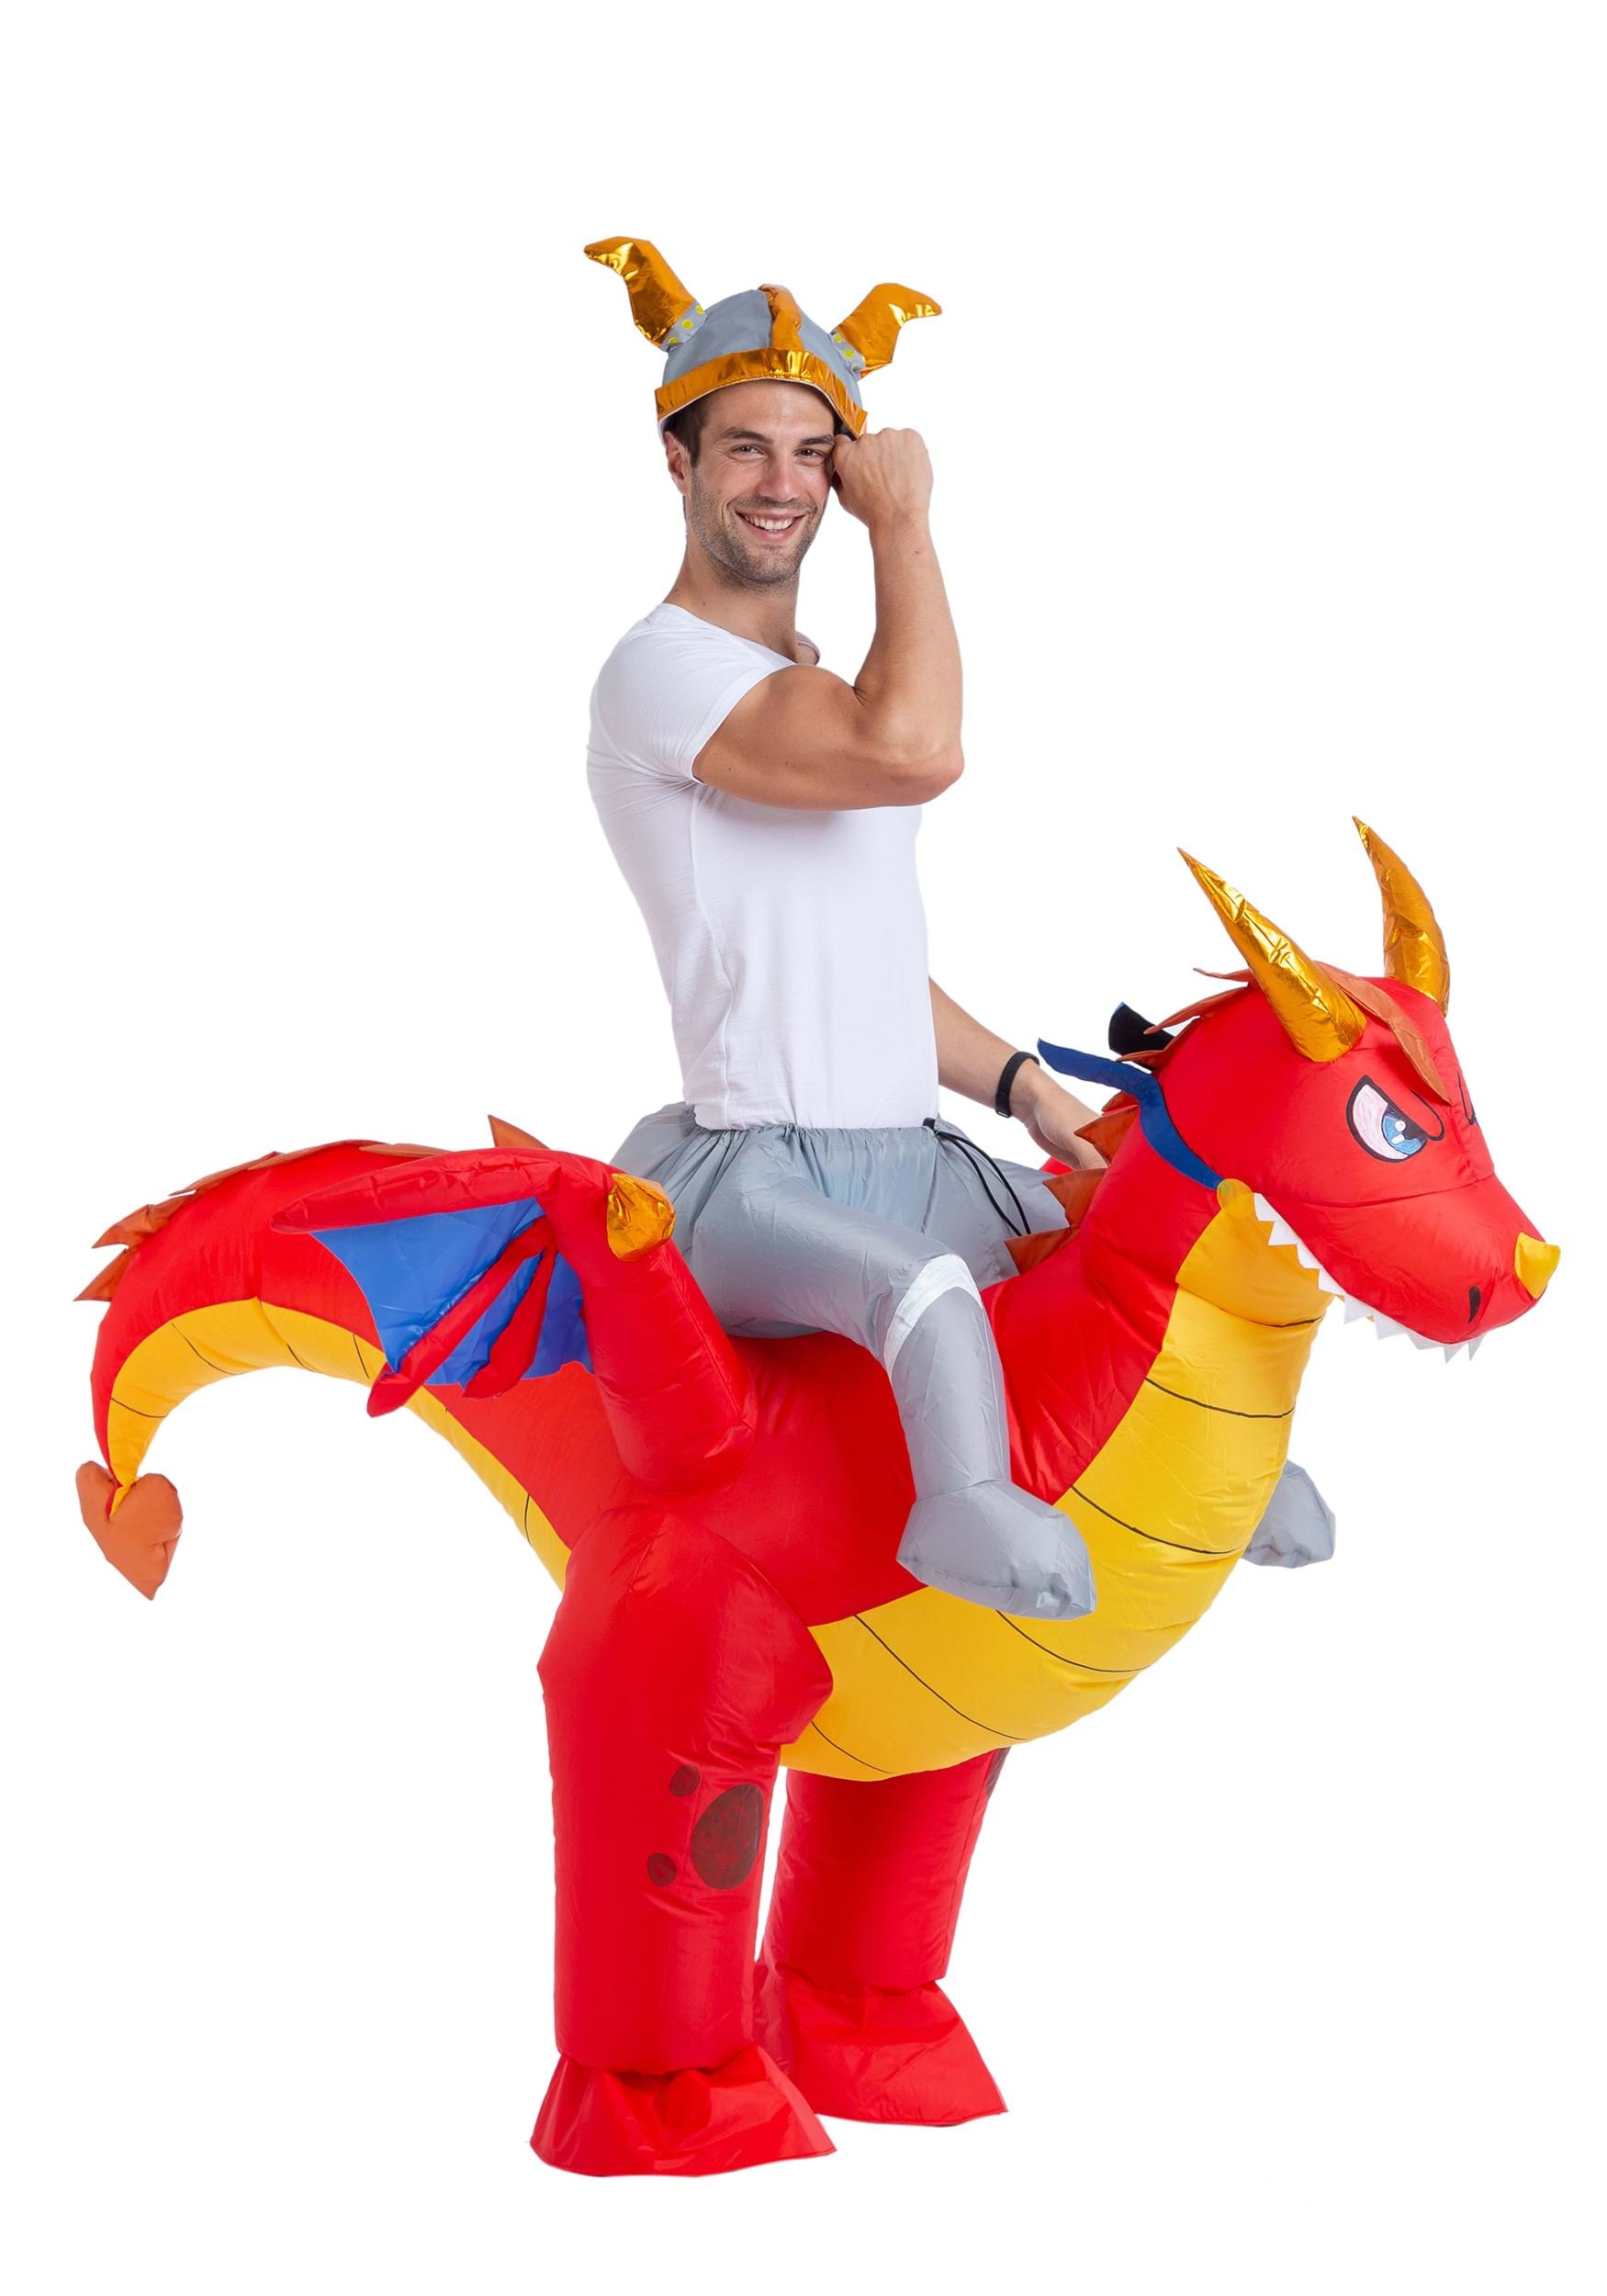 Adult Riding A Fire Dragon Inflatable Fancy Dress Costume , Adult Funny Fancy Dress Costumes